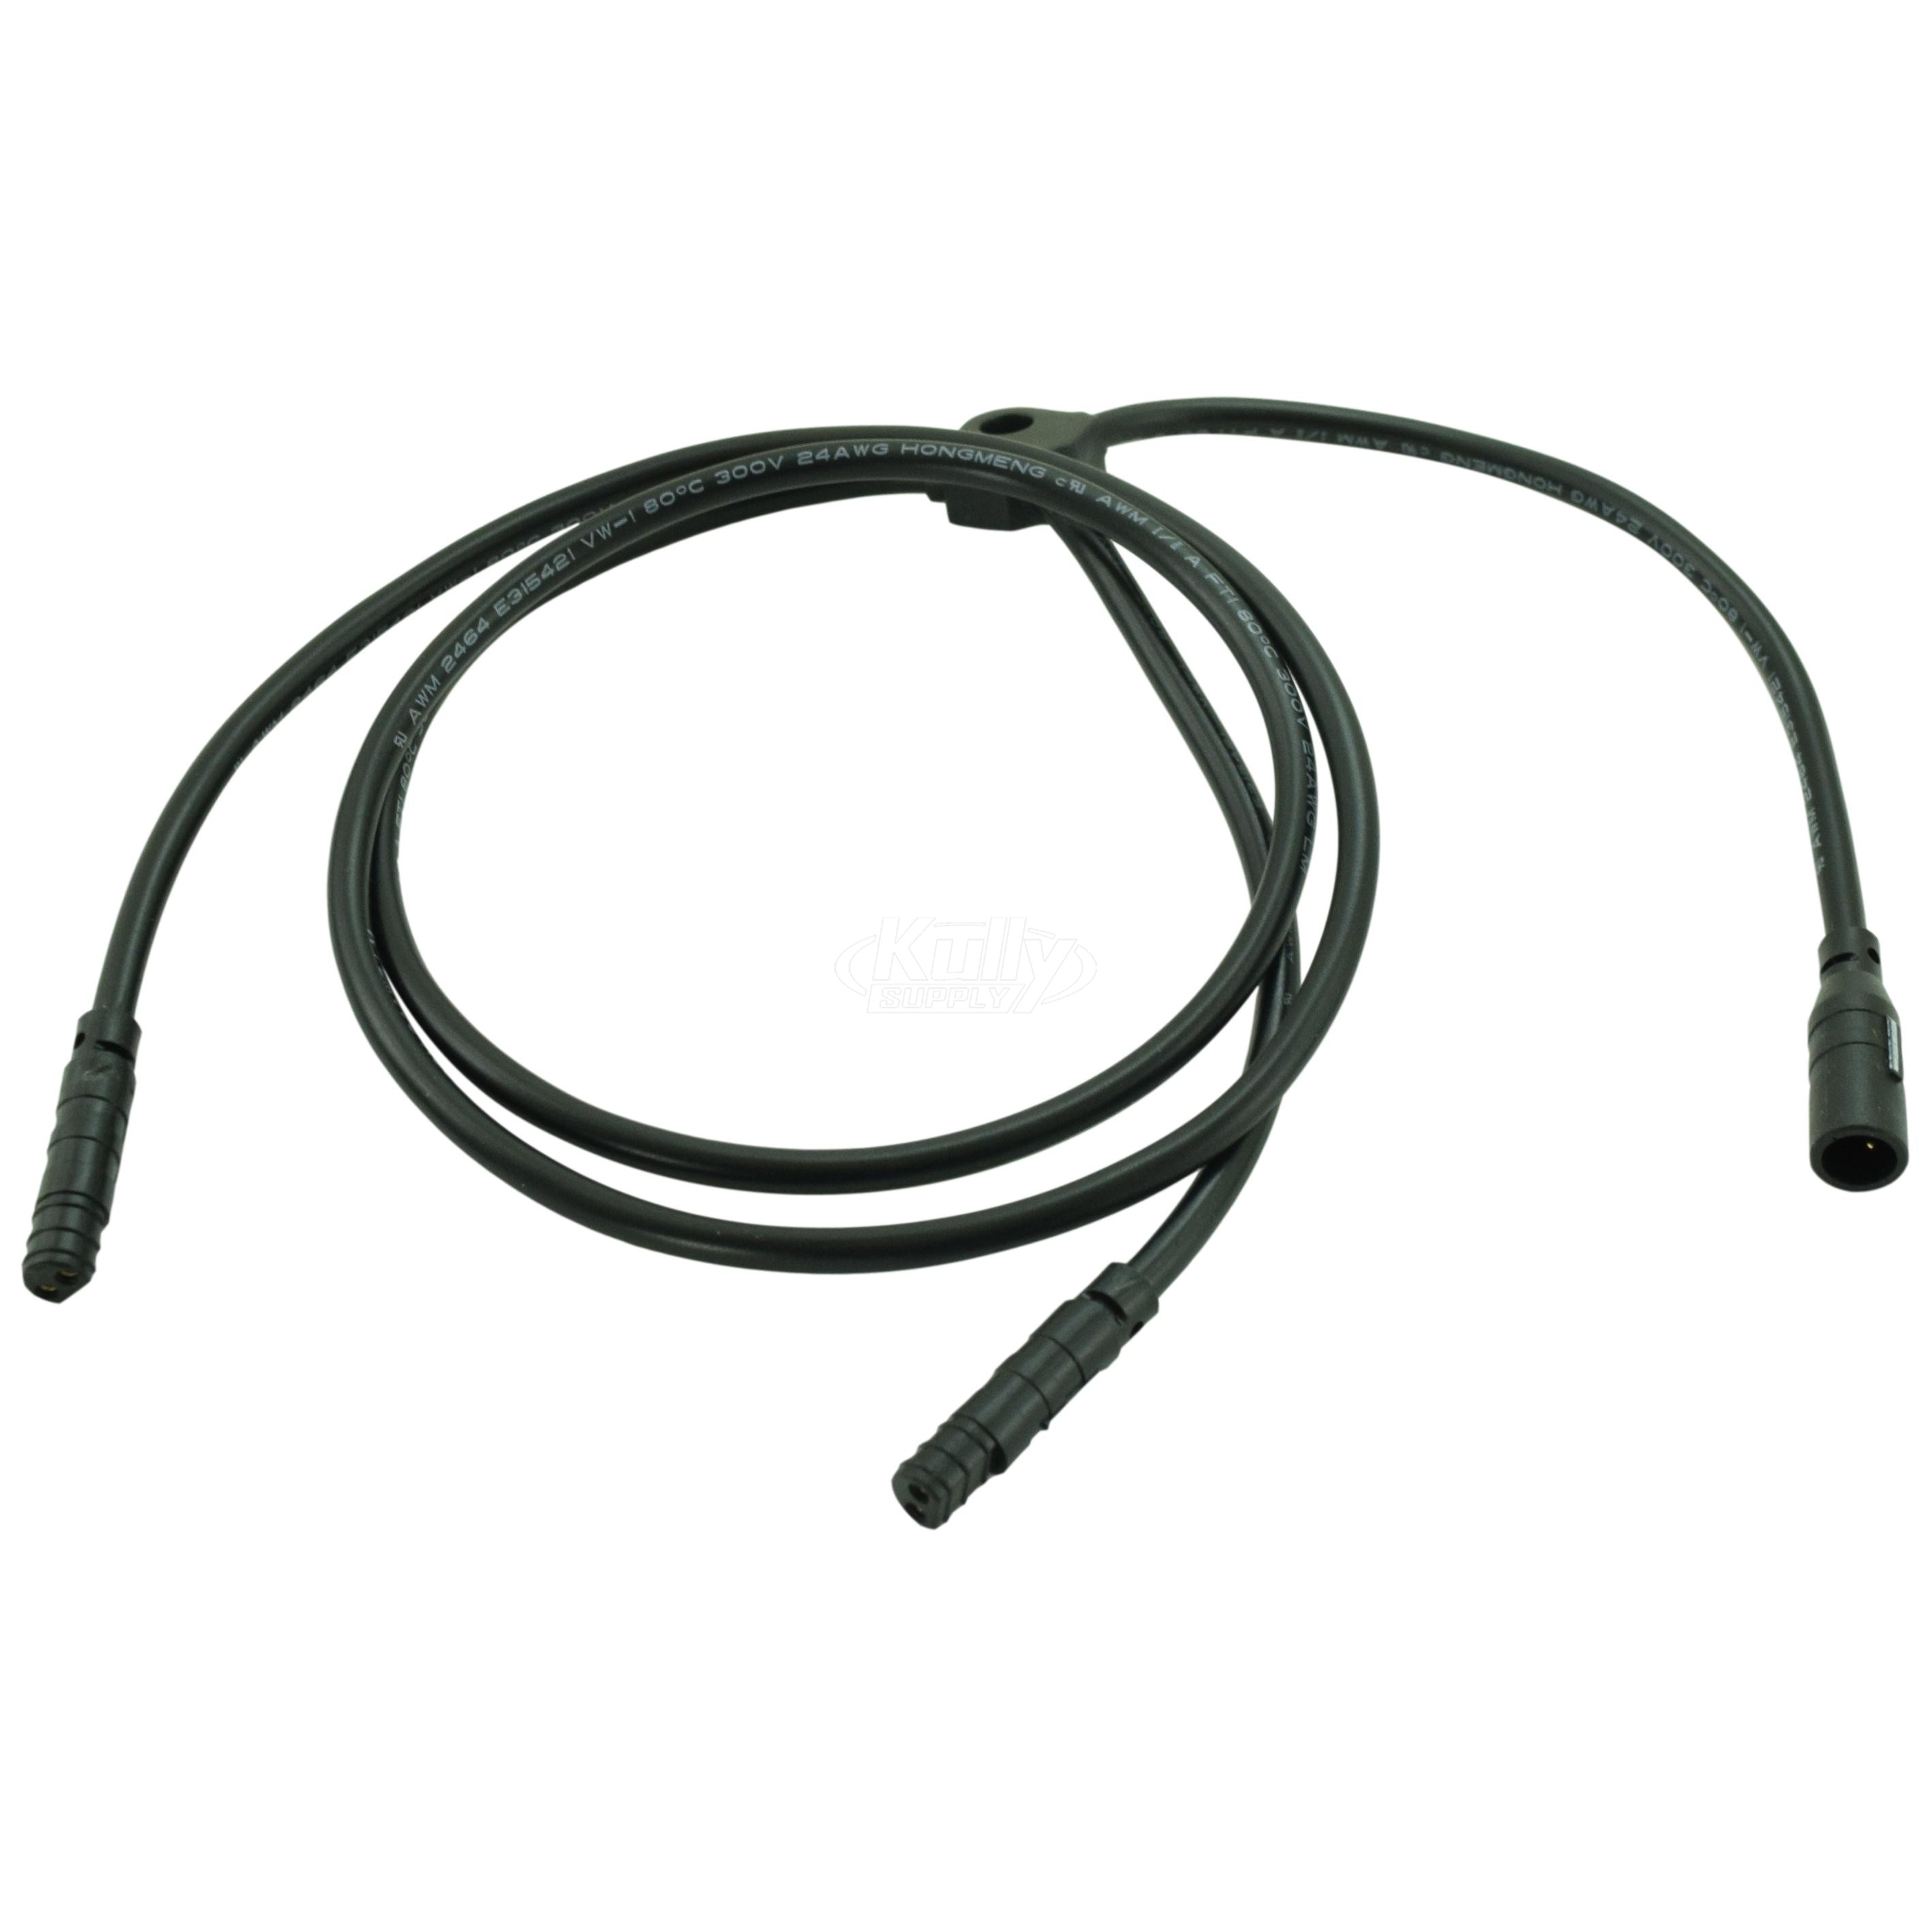 Sloan EAF-23-A Splitter Cable (for EAF Series Faucets)